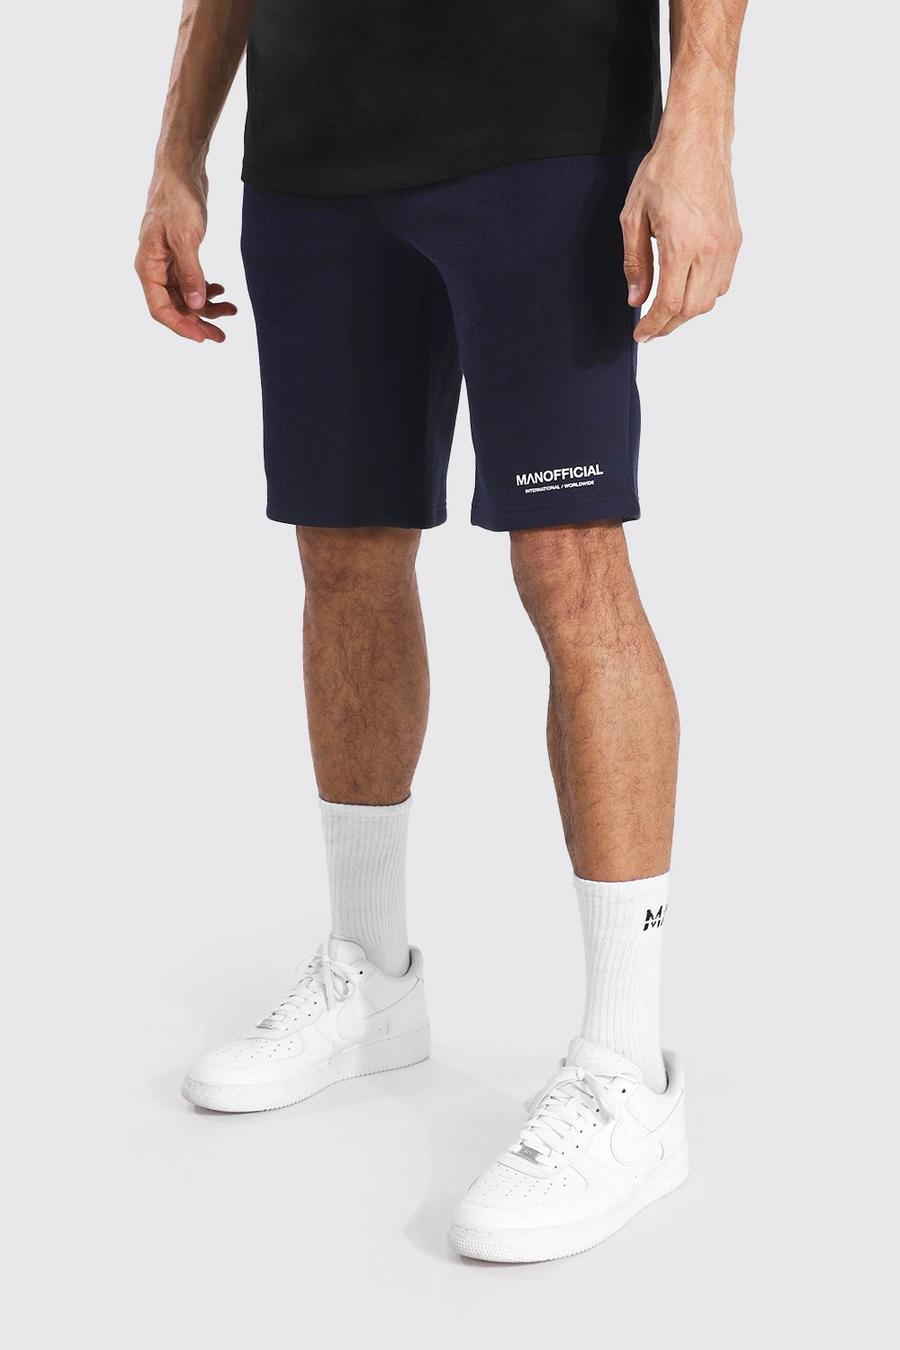 Navy Tall Man Official Waistband Mid Jersey Short image number 1